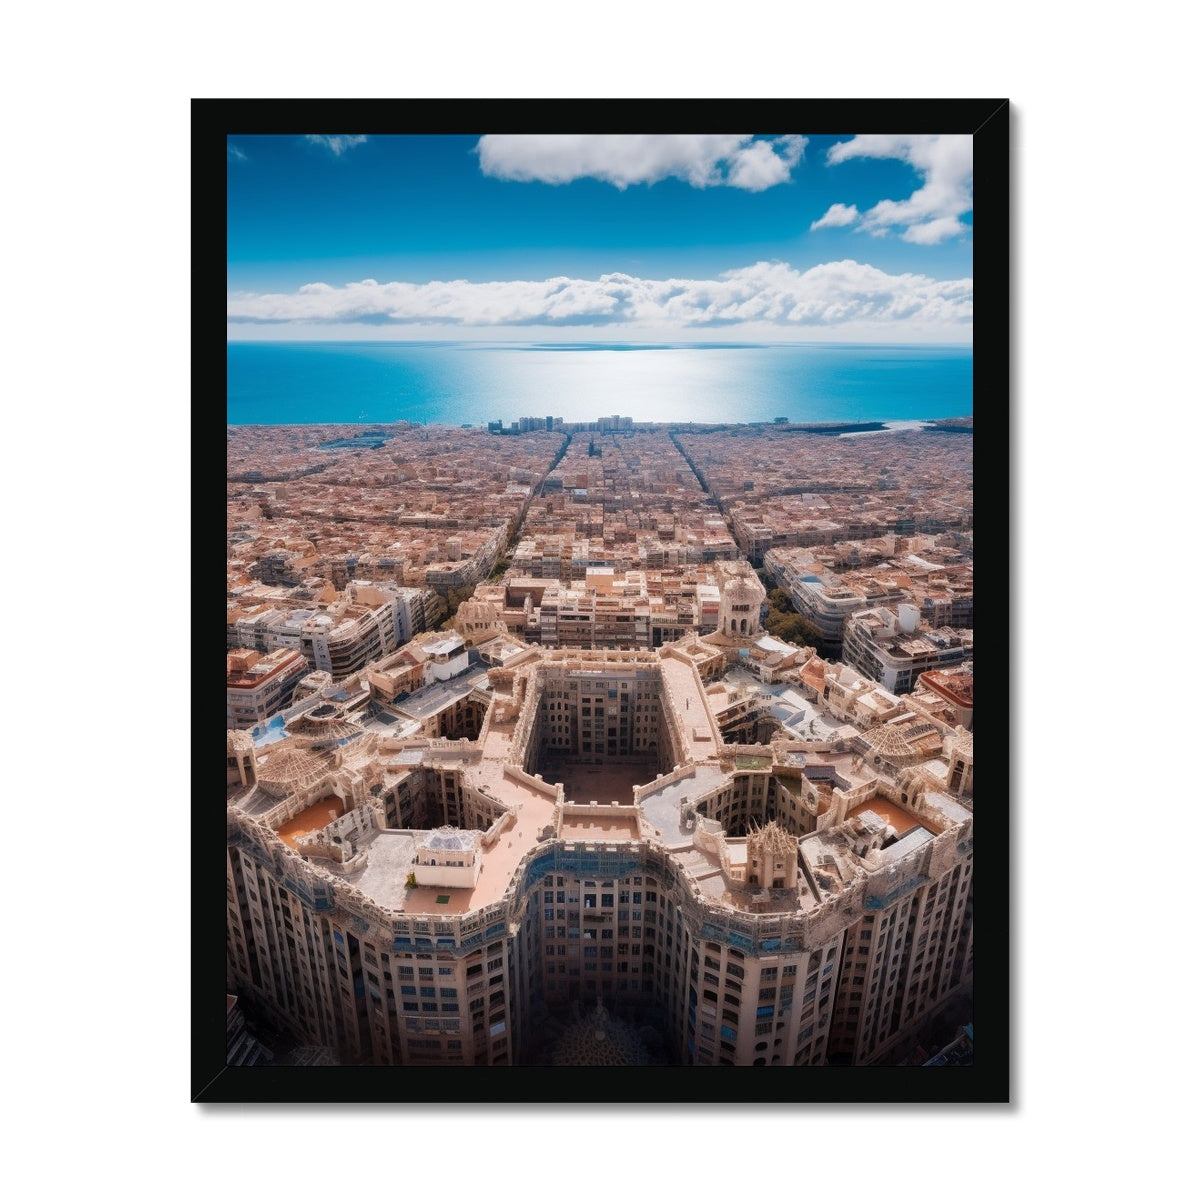 Barcelona Architecture From The Sky  Framed Print